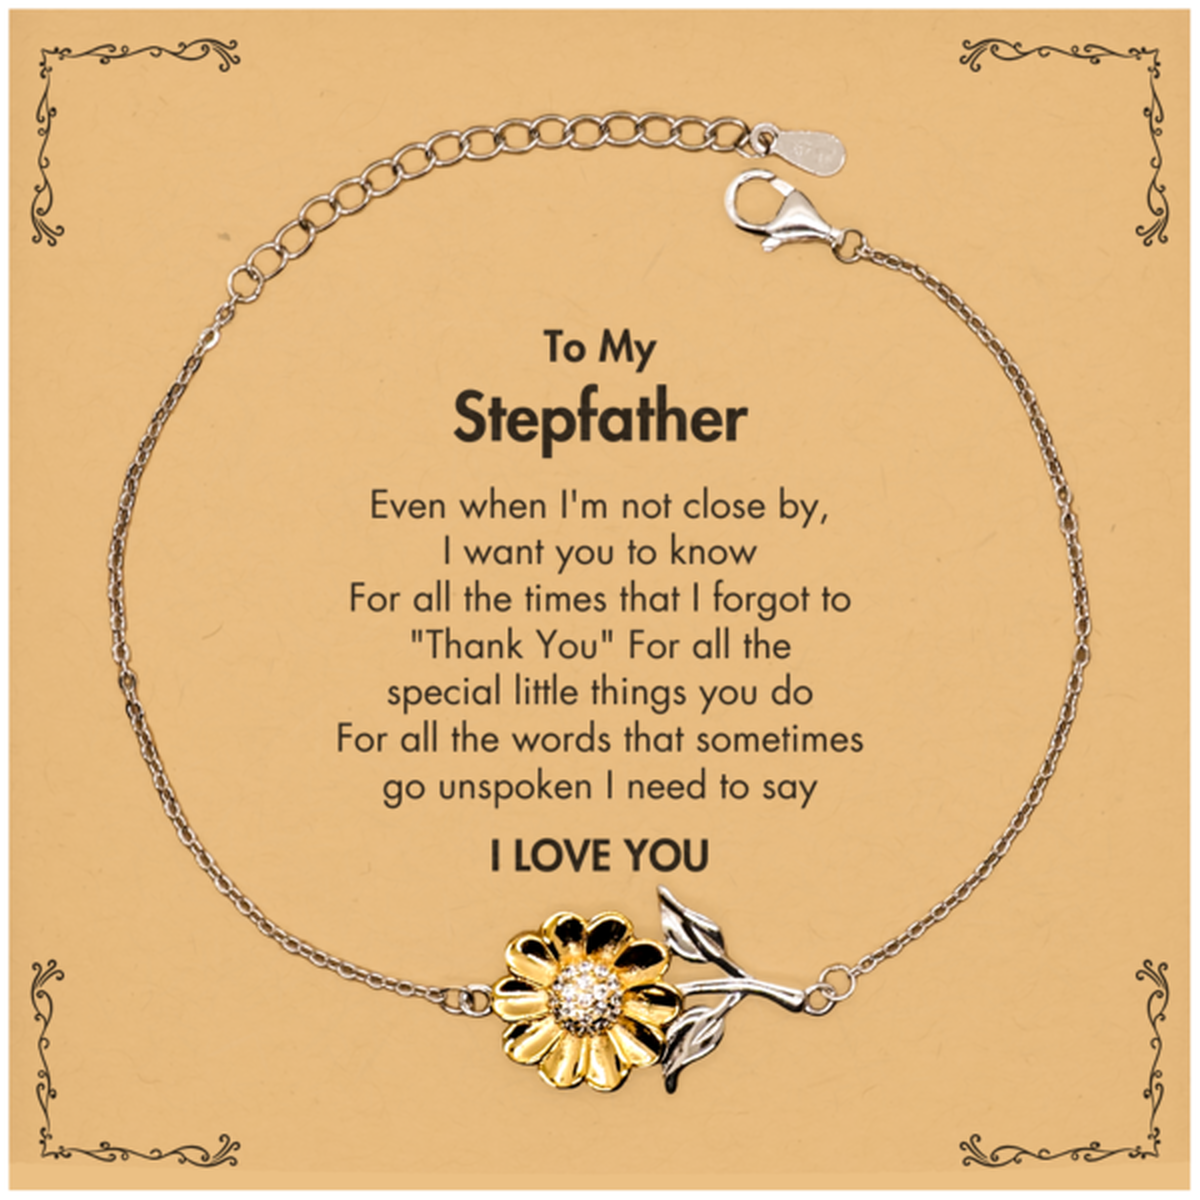 Thank You Gifts for Stepfather, Keepsake Sunflower Bracelet Gifts for Stepfather Birthday Mother's day Father's Day Stepfather For all the words That sometimes go unspoken I need to say I LOVE YOU